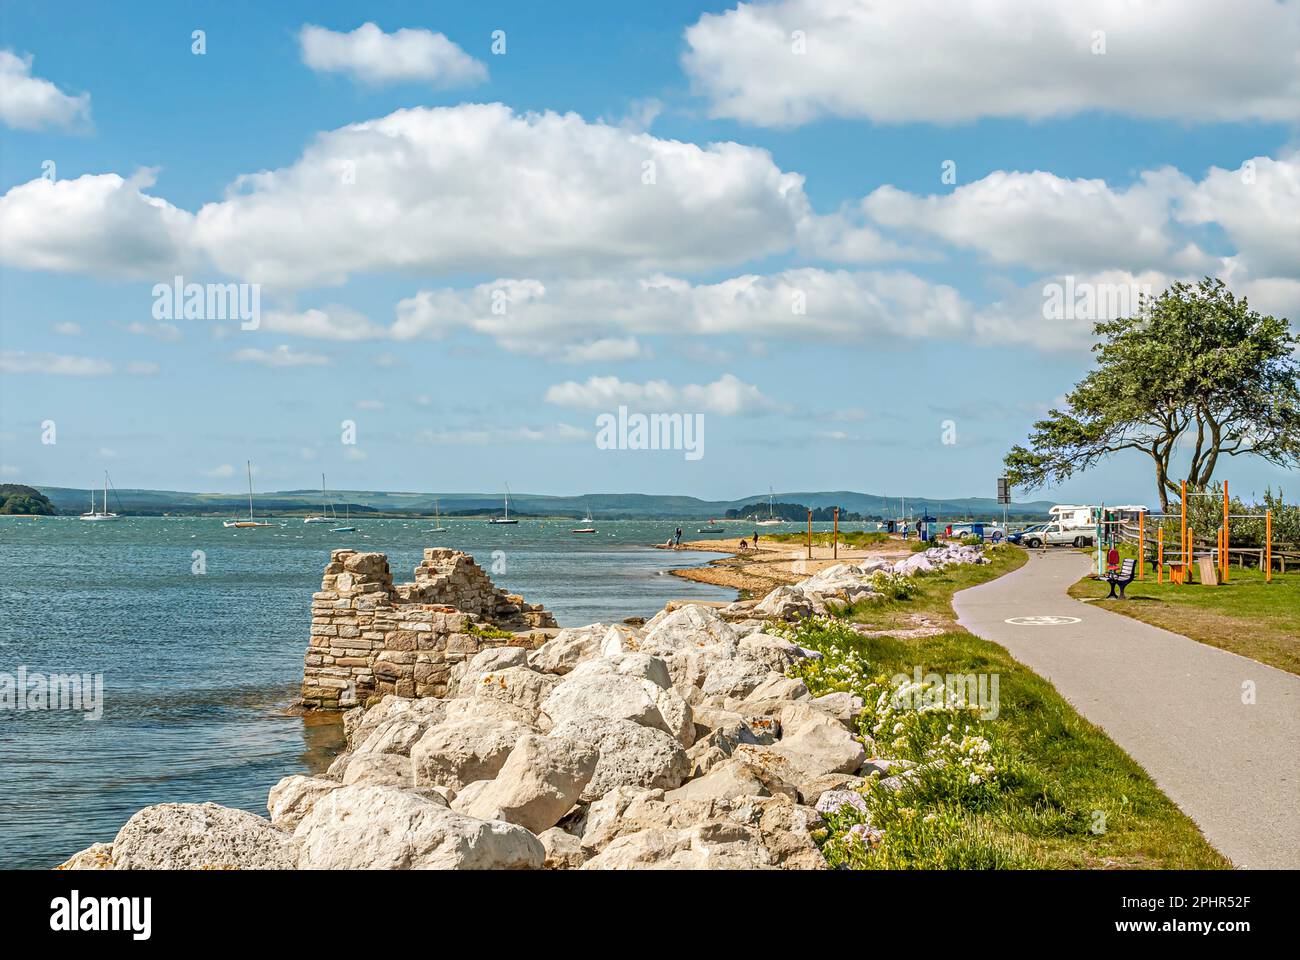 Seascape at Poole Harbour in Dorset, England Stock Photo